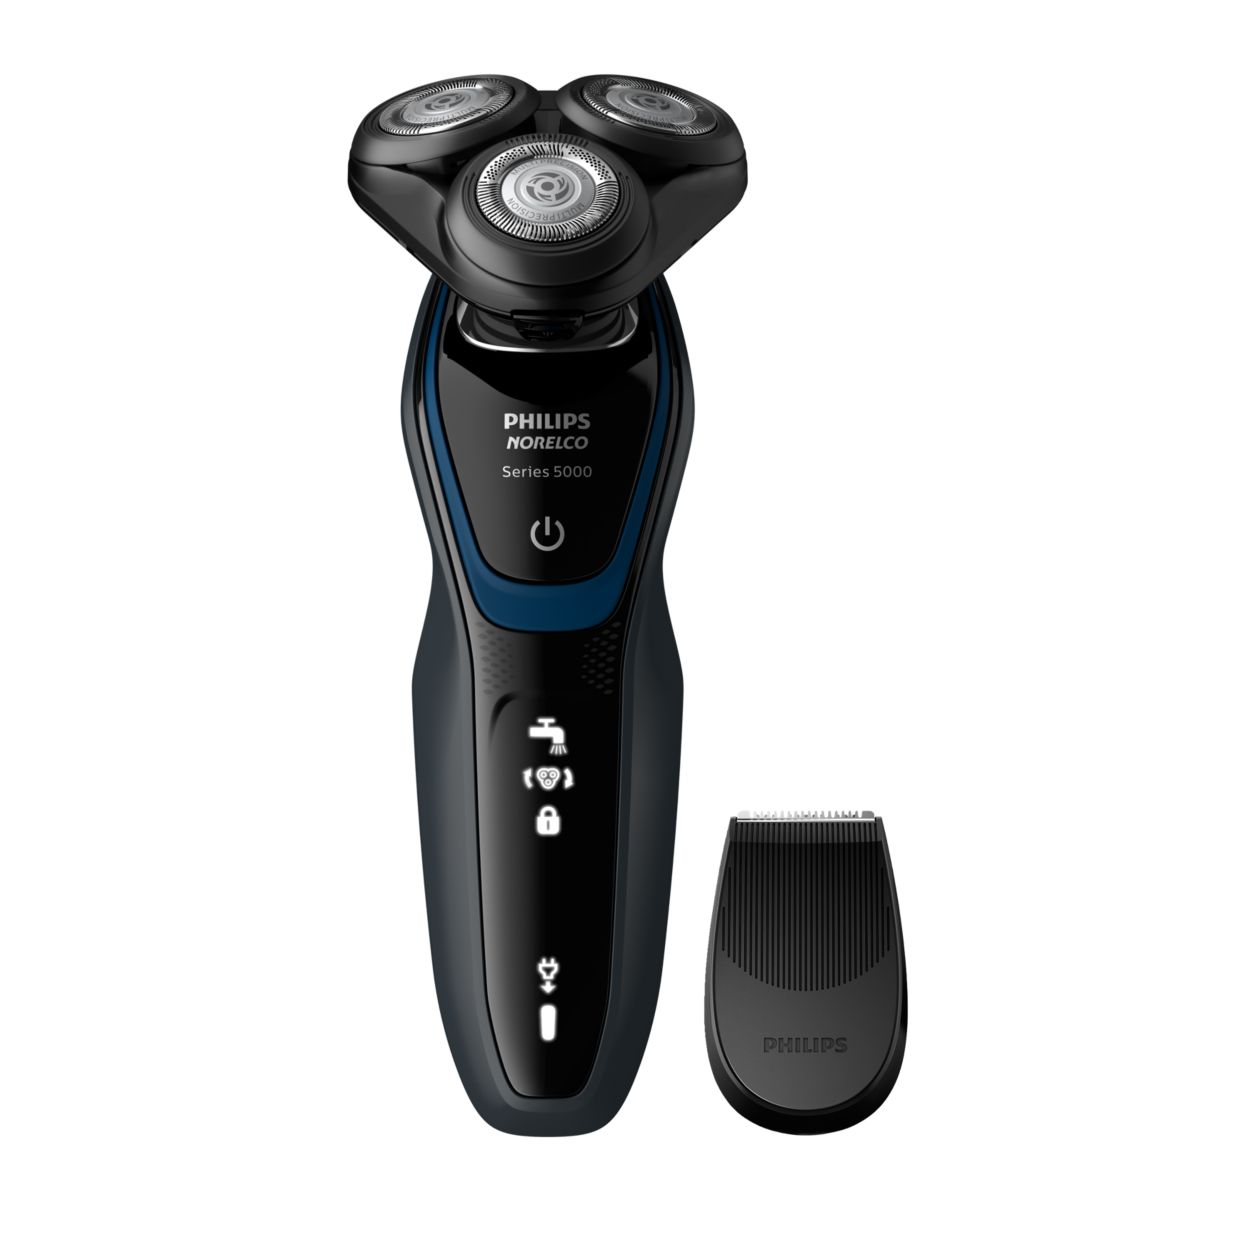 Shaver 5100 Wet & dry electric shaver, Series 5000 S5203/81 | Norelco